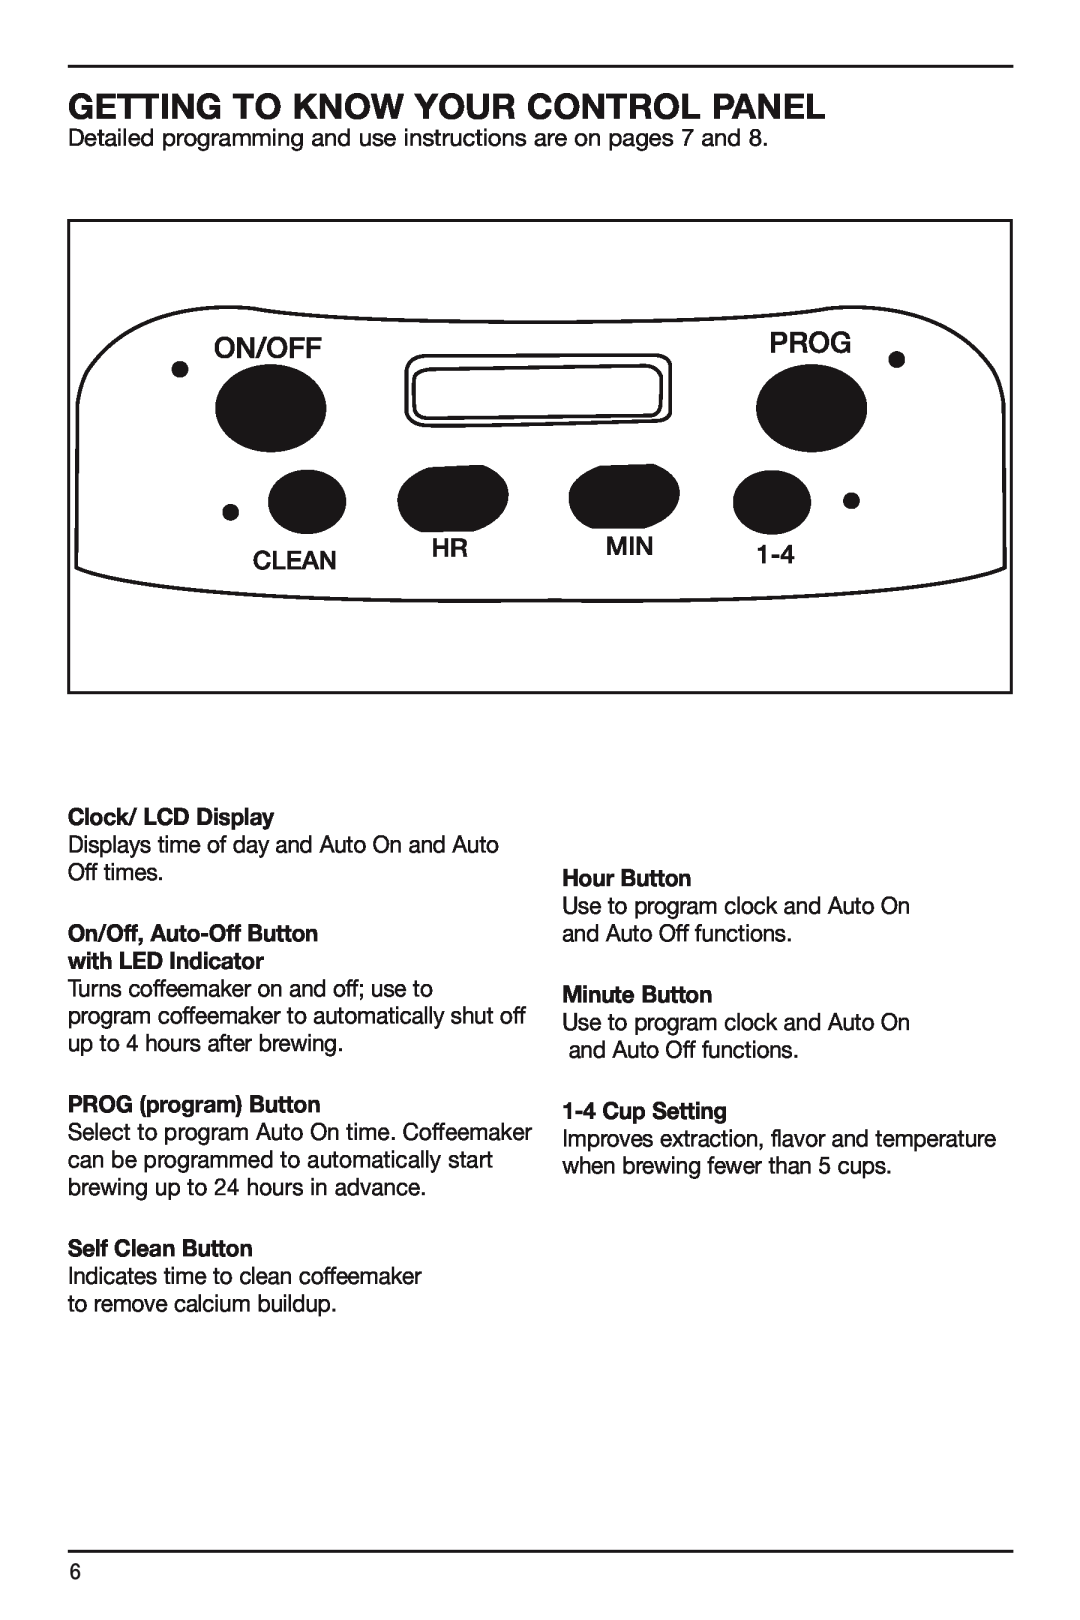 Cuisinart DCC-750 manual Getting To Know Your Control Panel, Clock/ LCD Display, PROG program Button, Self Clean Button 